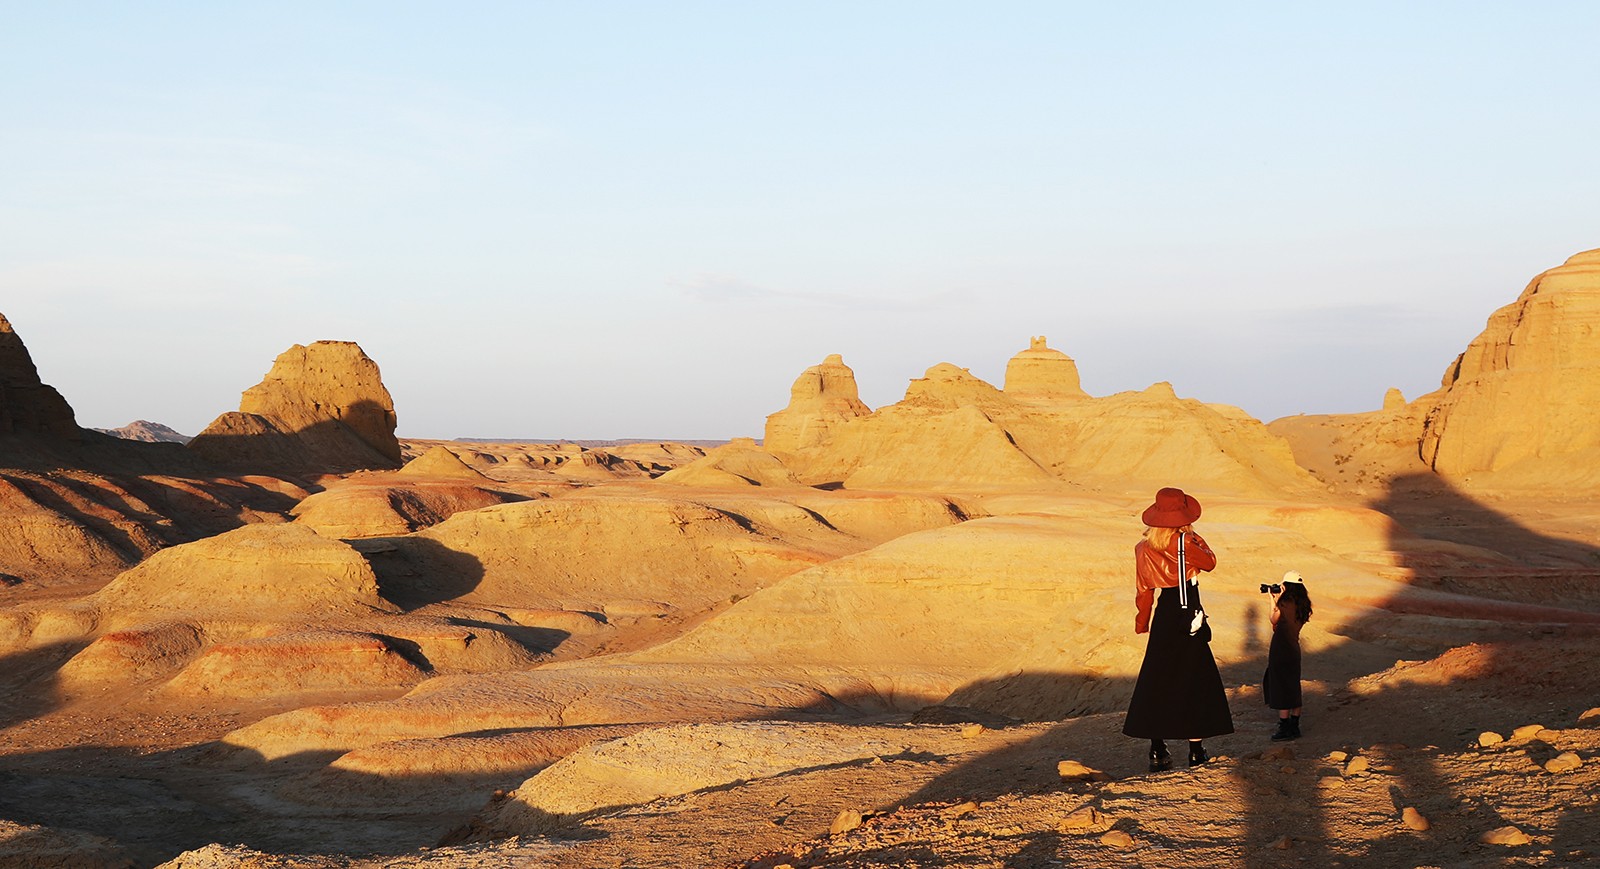 Visitors take photos of the wind-eroded landscape of the 